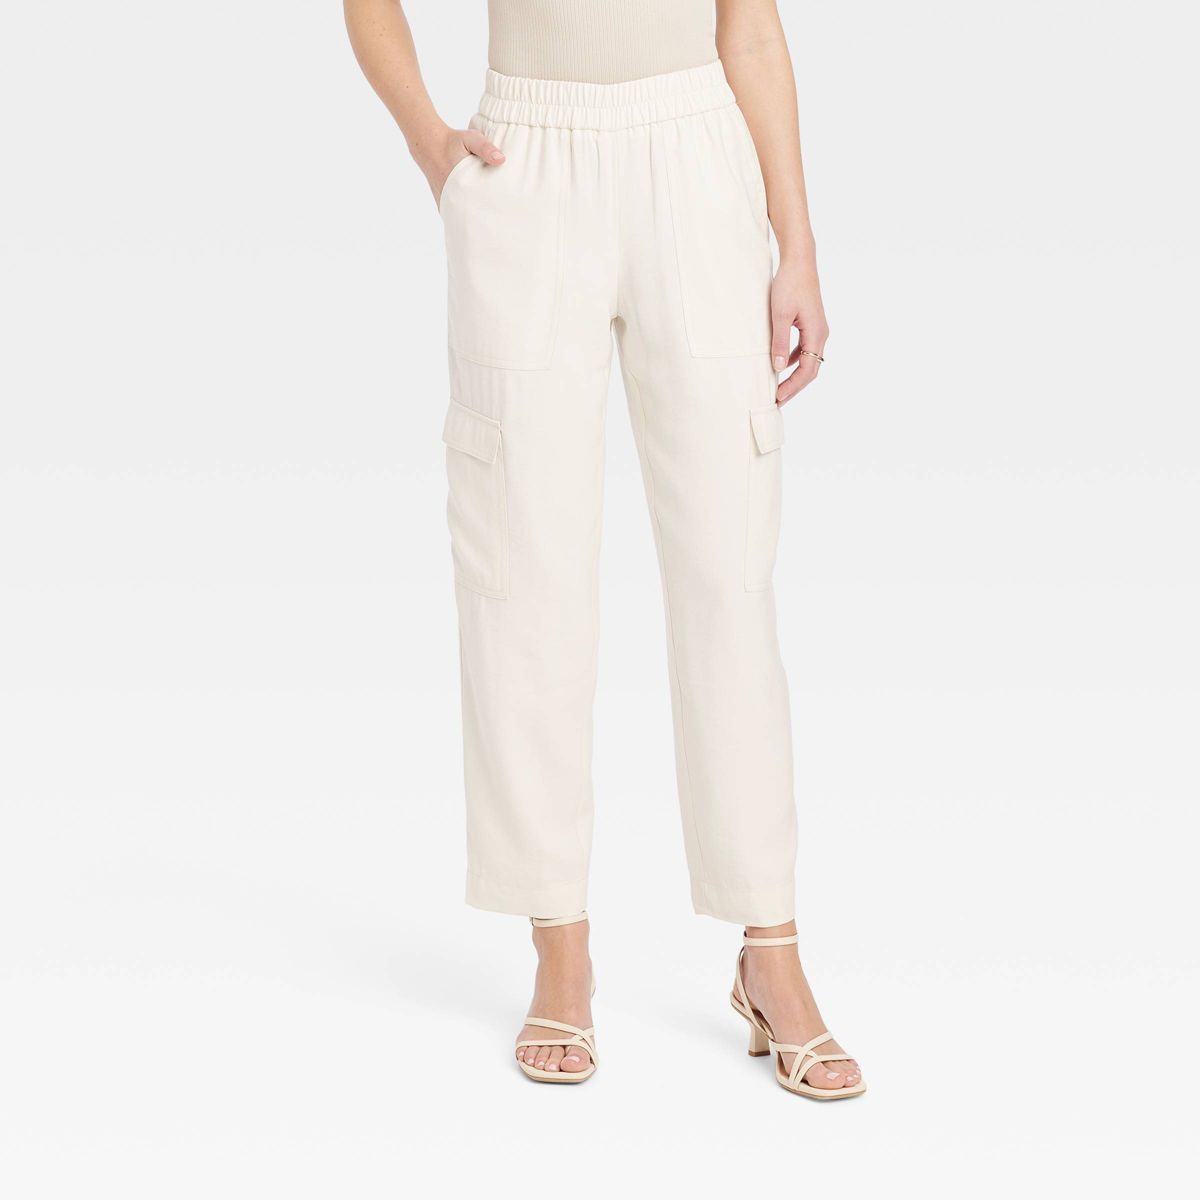 Women's High-Rise Ankle Cargo Pants - A New Day™ Cream L | Target